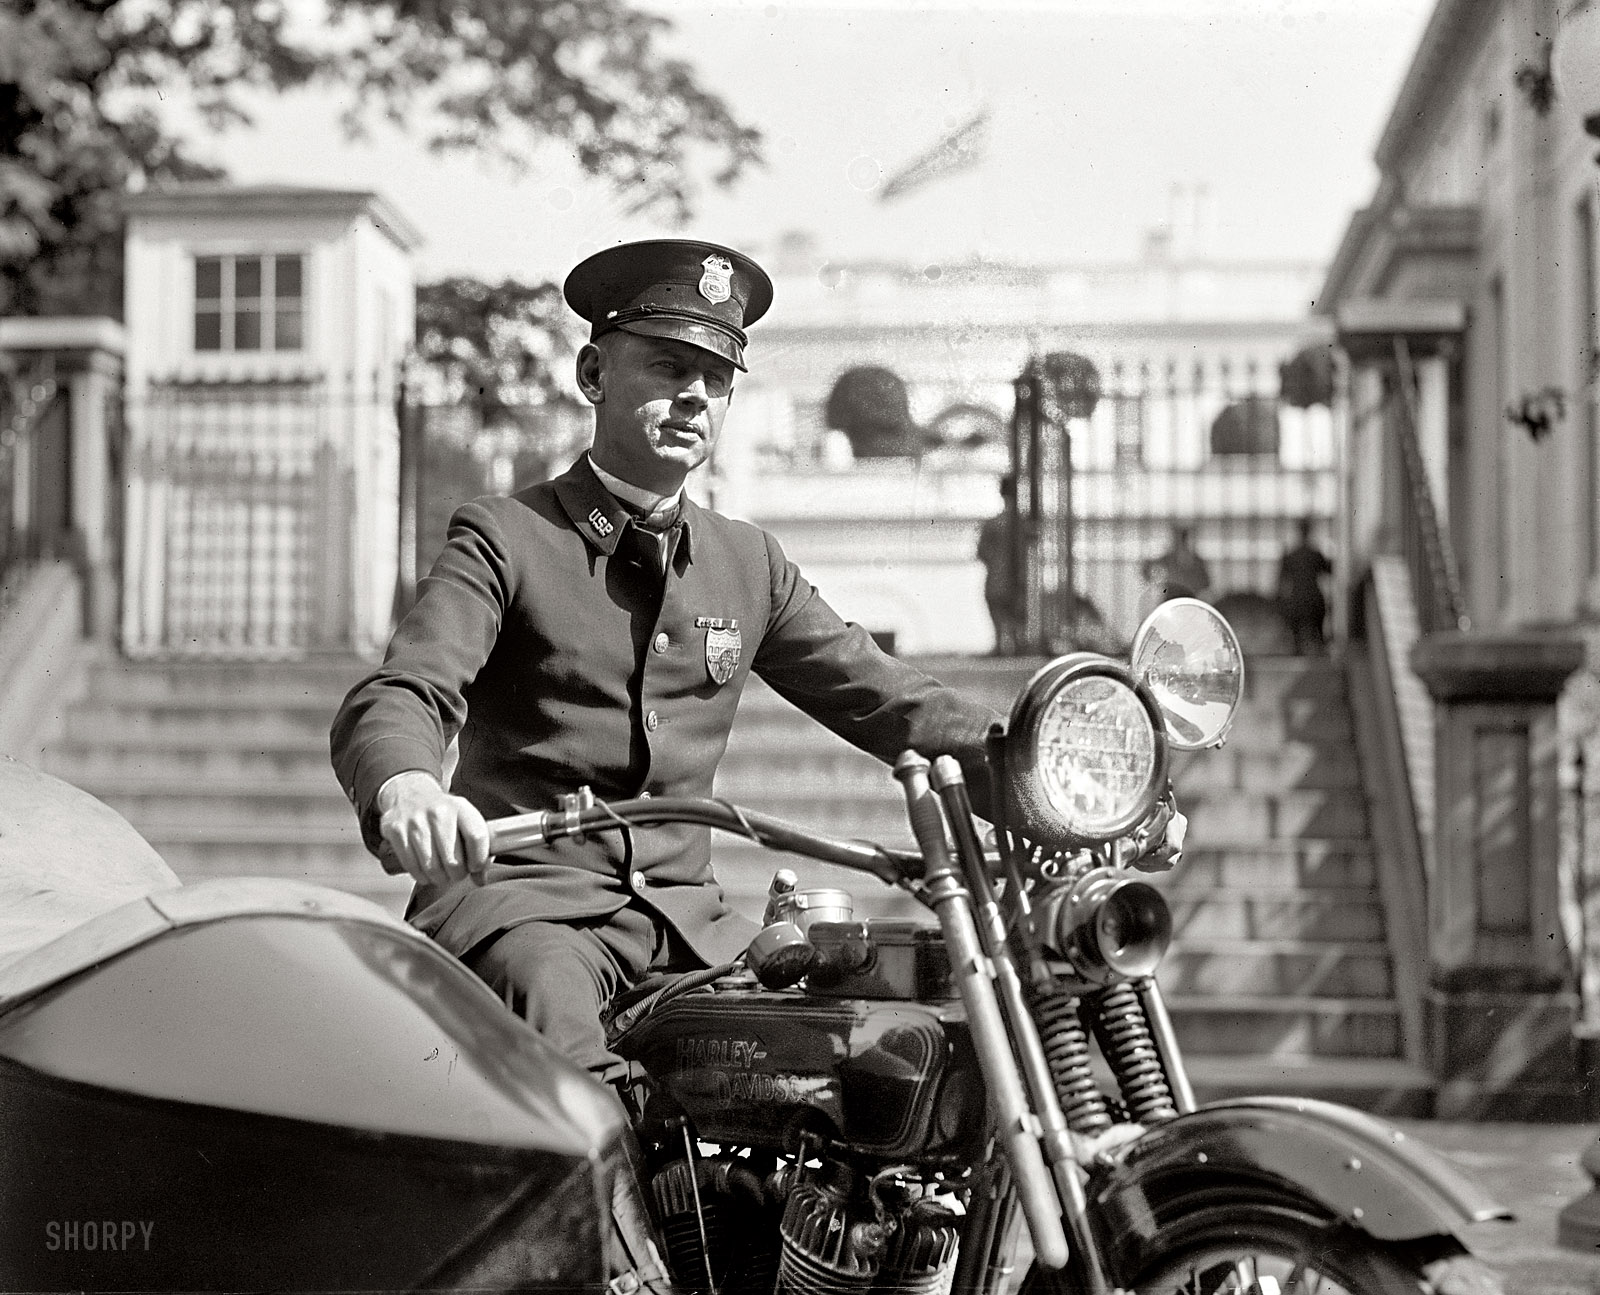 At the White House gates. "M.A. Rainey, October 5, 1922." National Photo Company Collection glass negative. View full size.